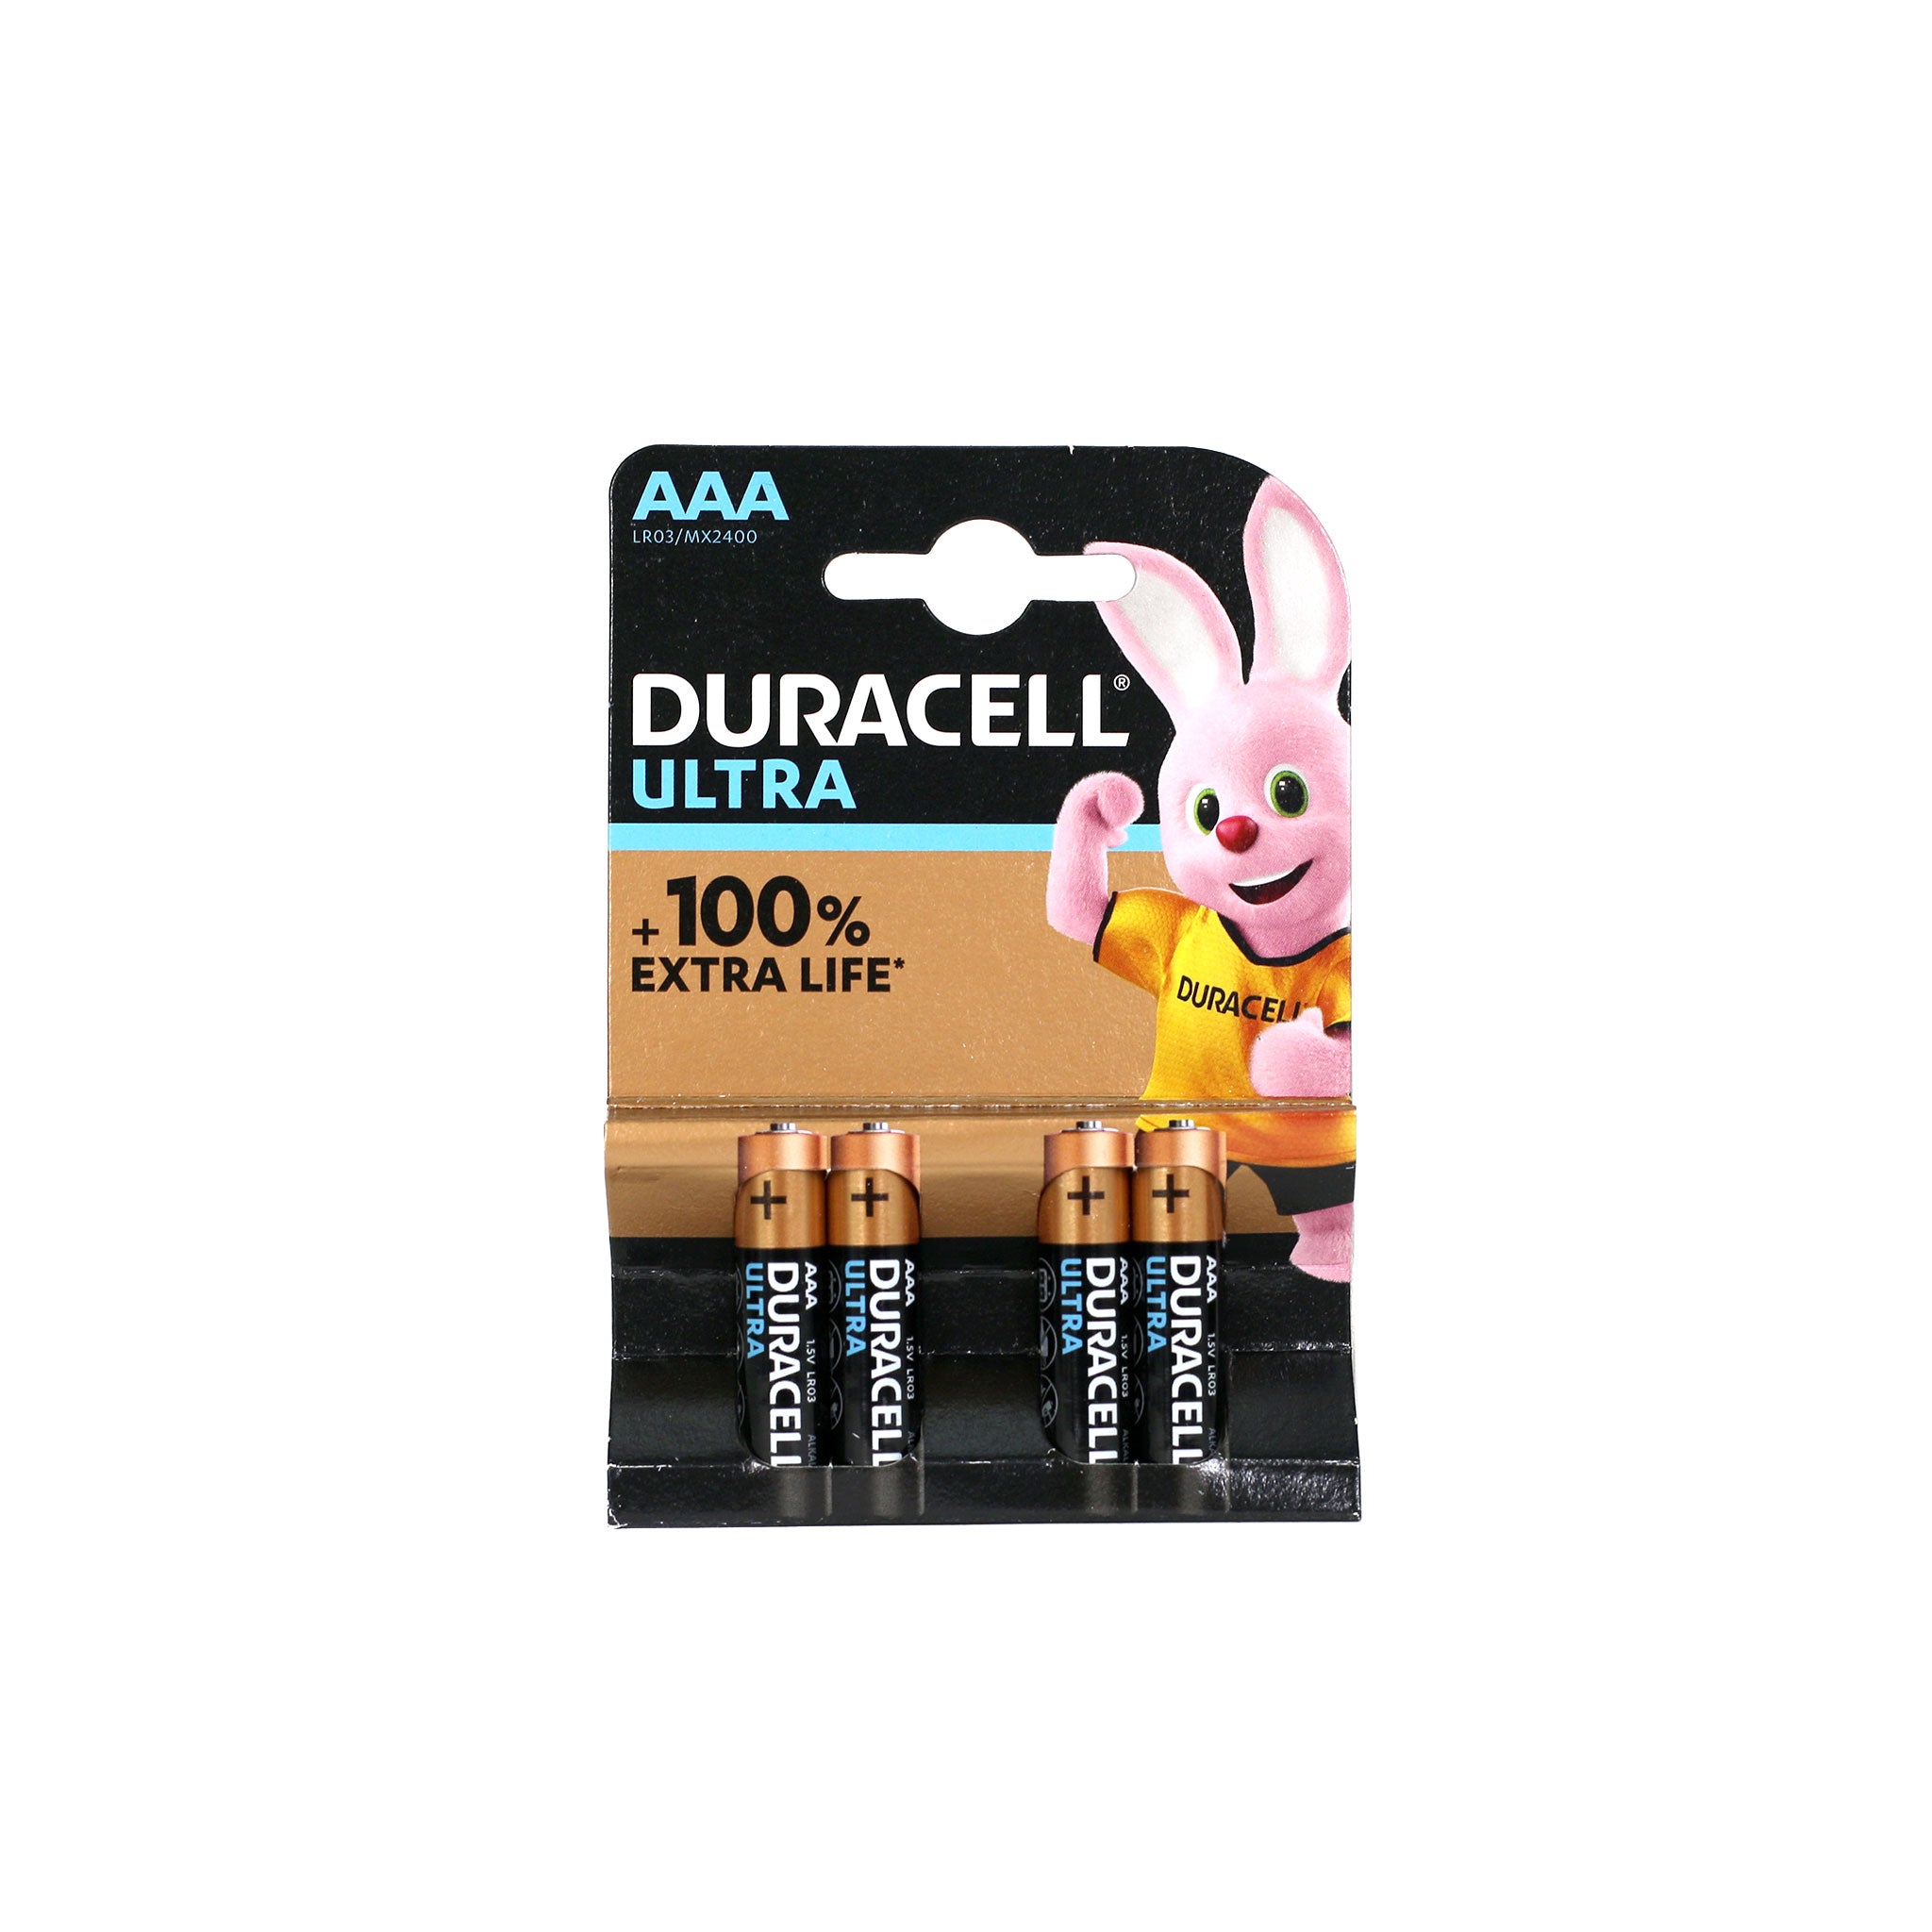 Duracell AAA batteries - Ultra Power and Plus Power